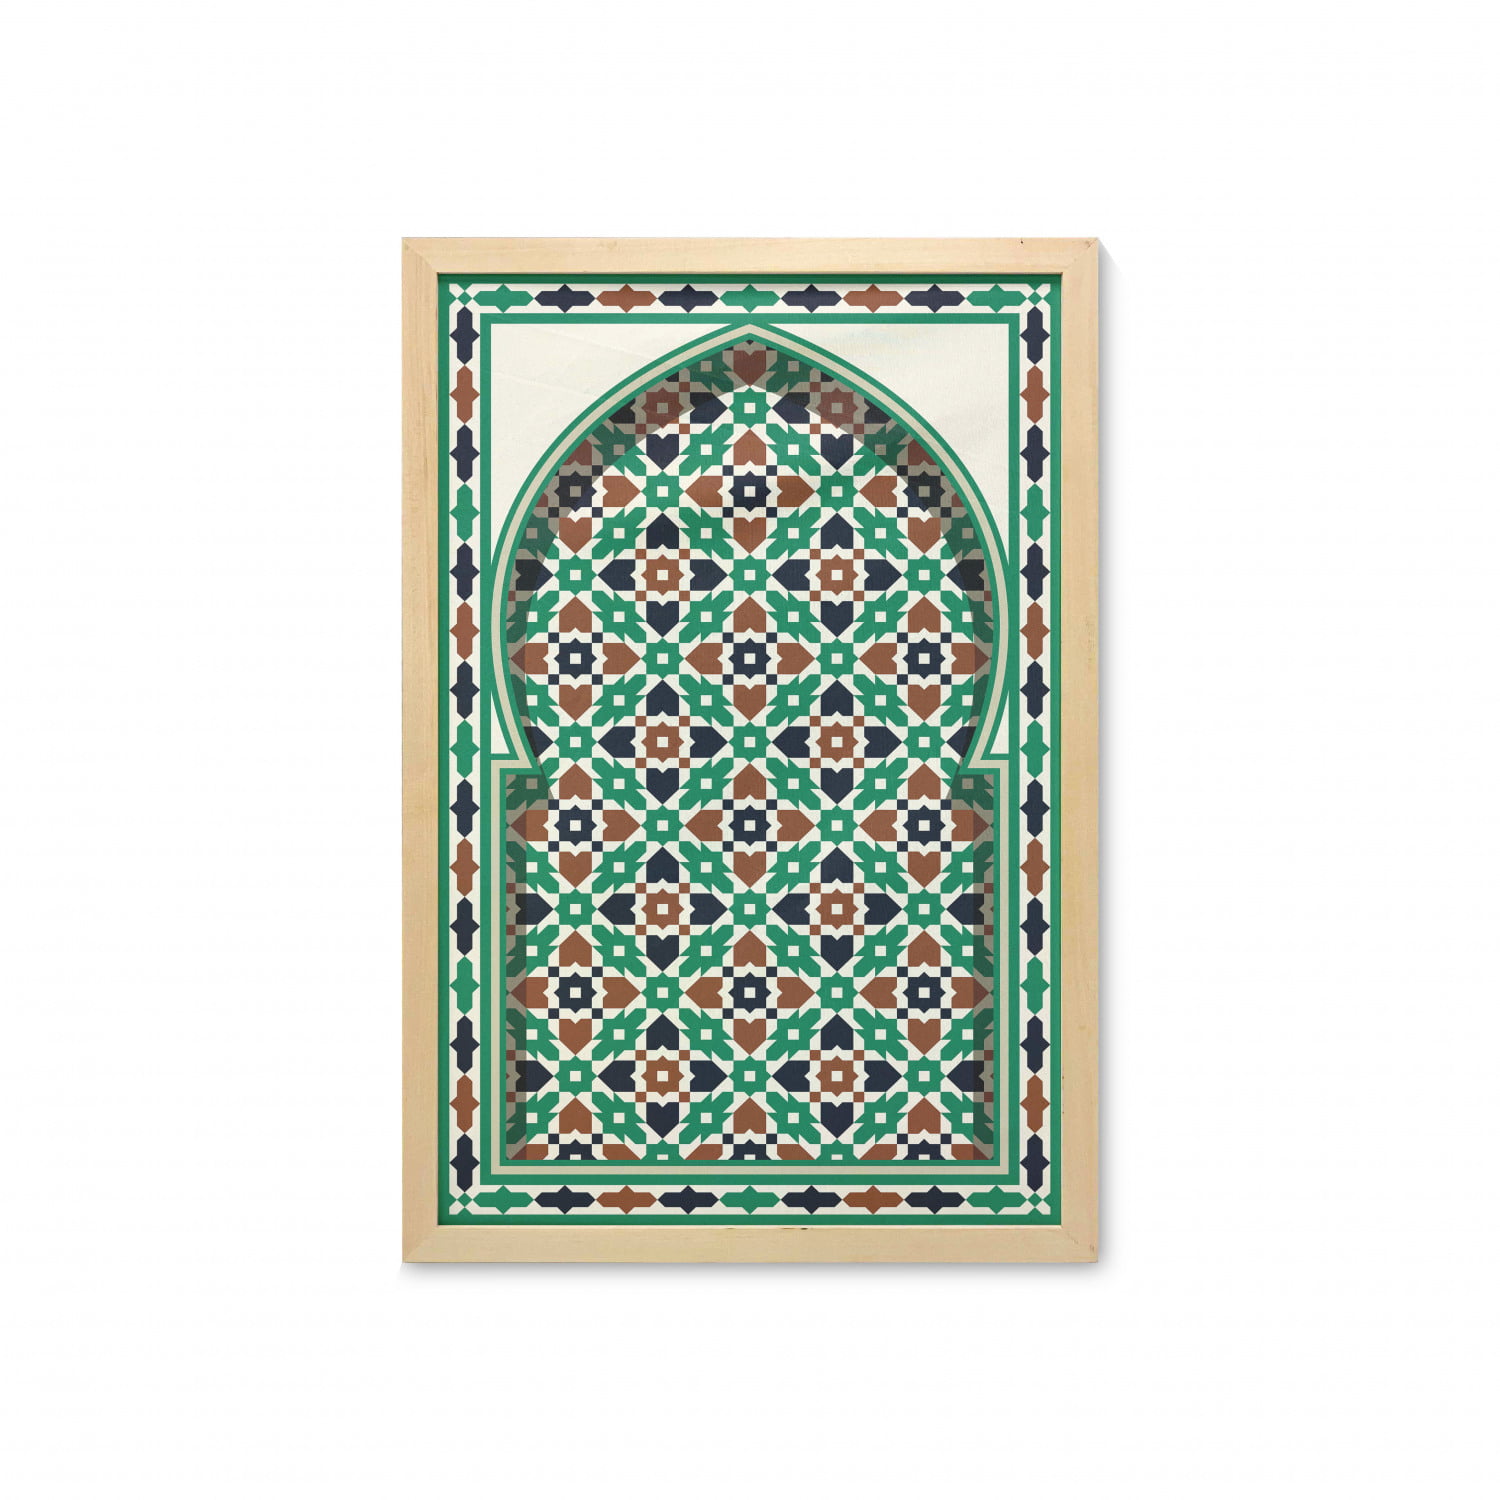 Ambesonne Moroccan Place Mats Set of 4 Middle Eastern Style Moroccan Door Arch with Medieval Floral Details Retro Green and Brown Washable Fabric Placemats for Dining Room Kitchen Table Decor